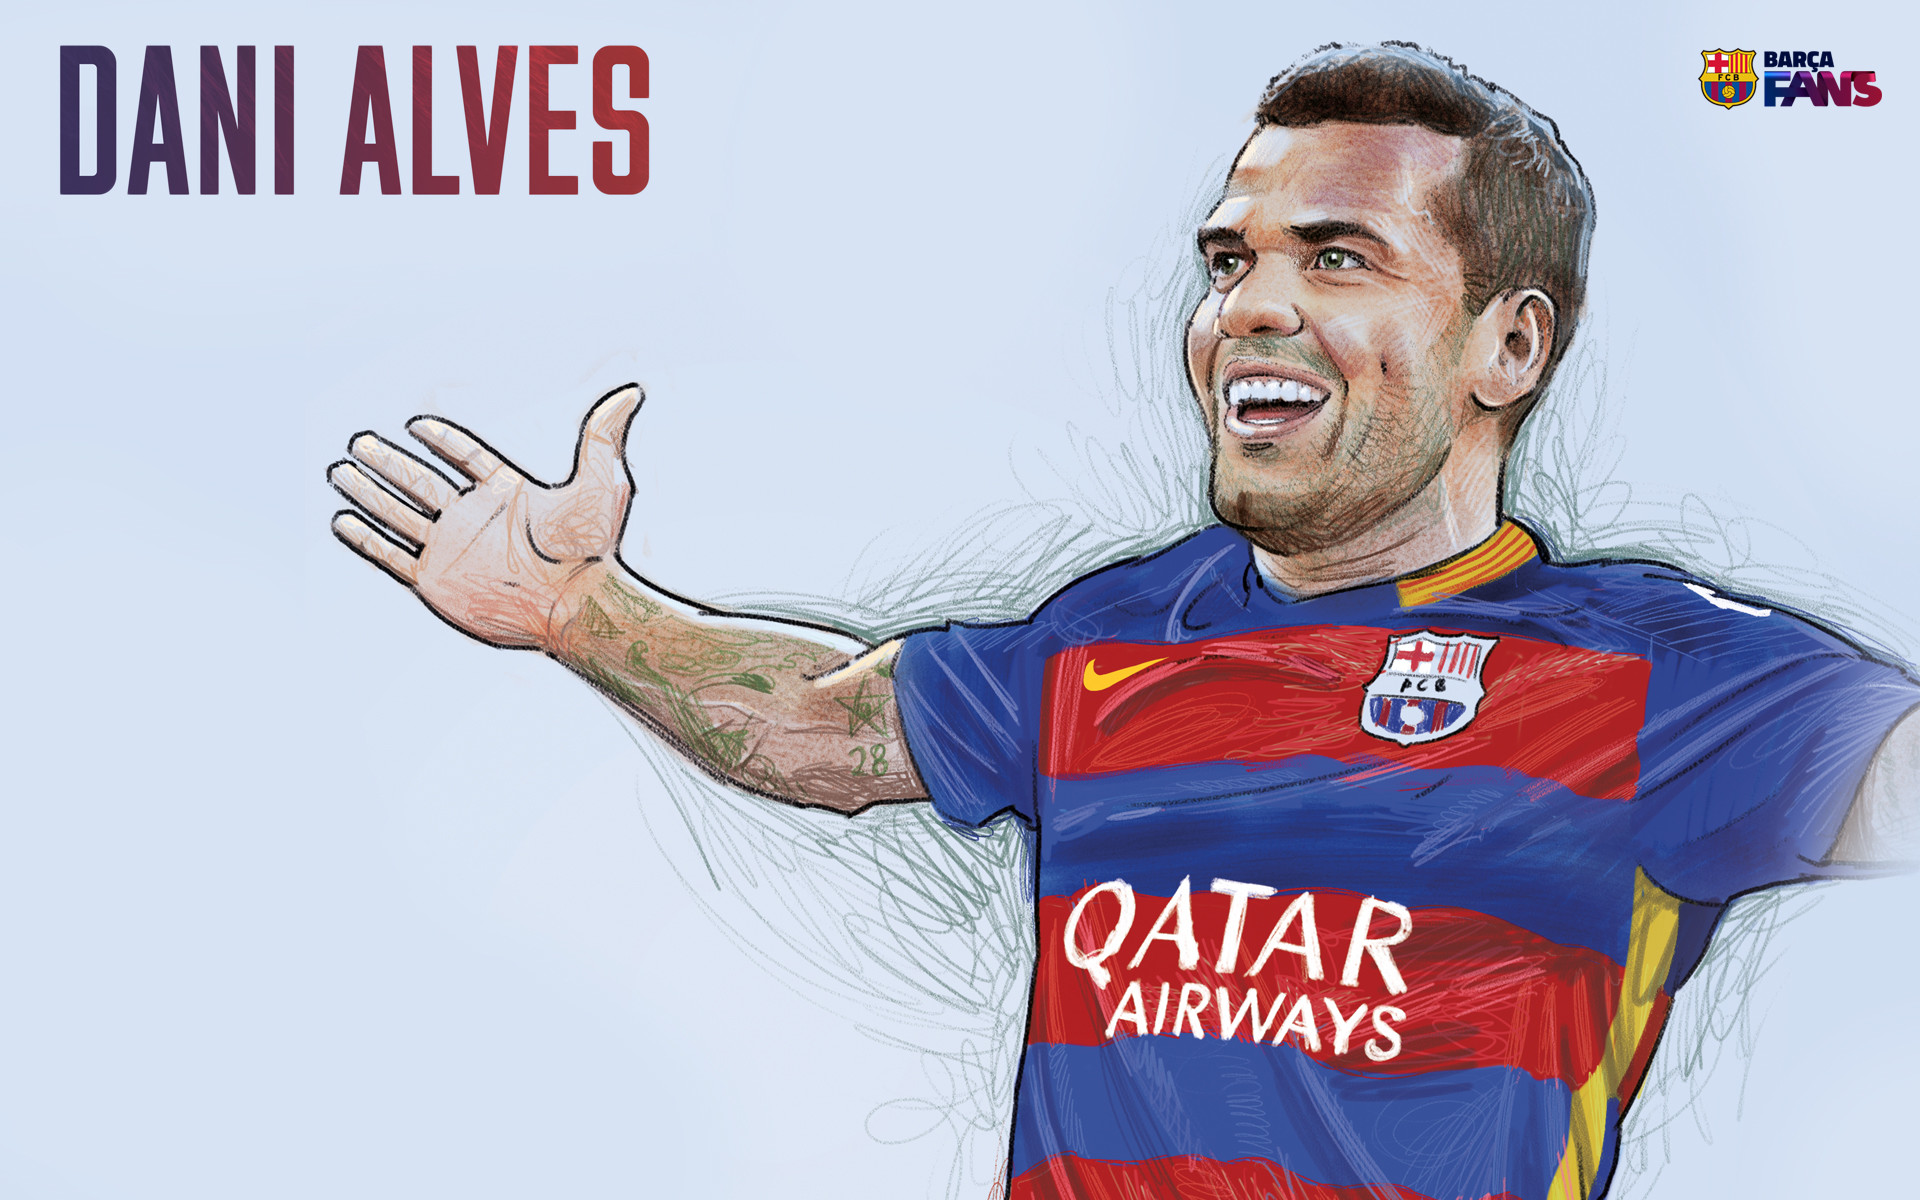 1920x1200 Wallpaper: Dani Alves - produced for Barca Fans by FCB | Projects to Try |  Pinterest